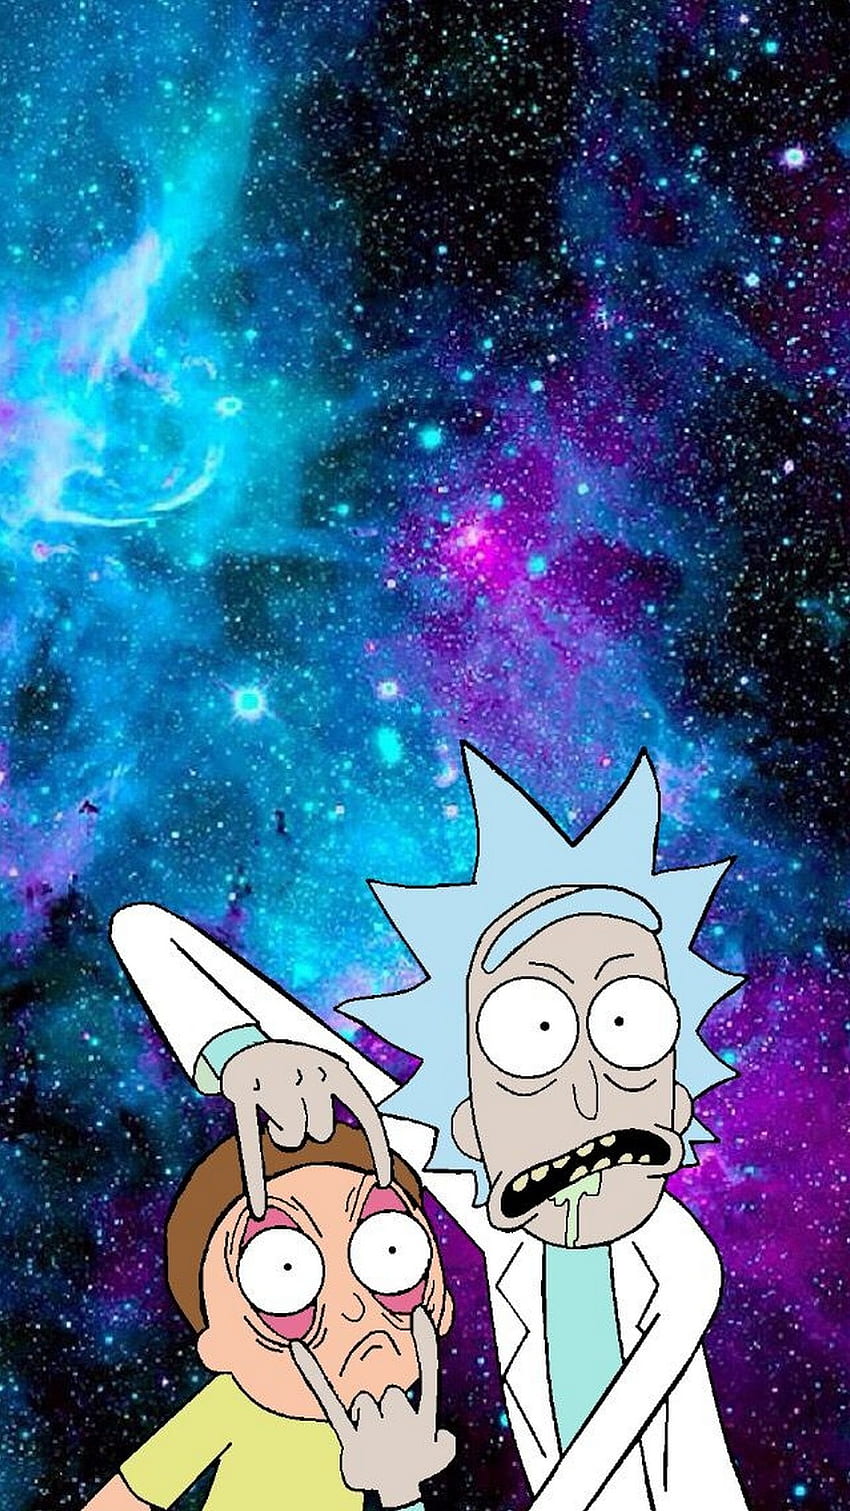 Rick and Morty phone wallpaper collection : r/rickandmorty